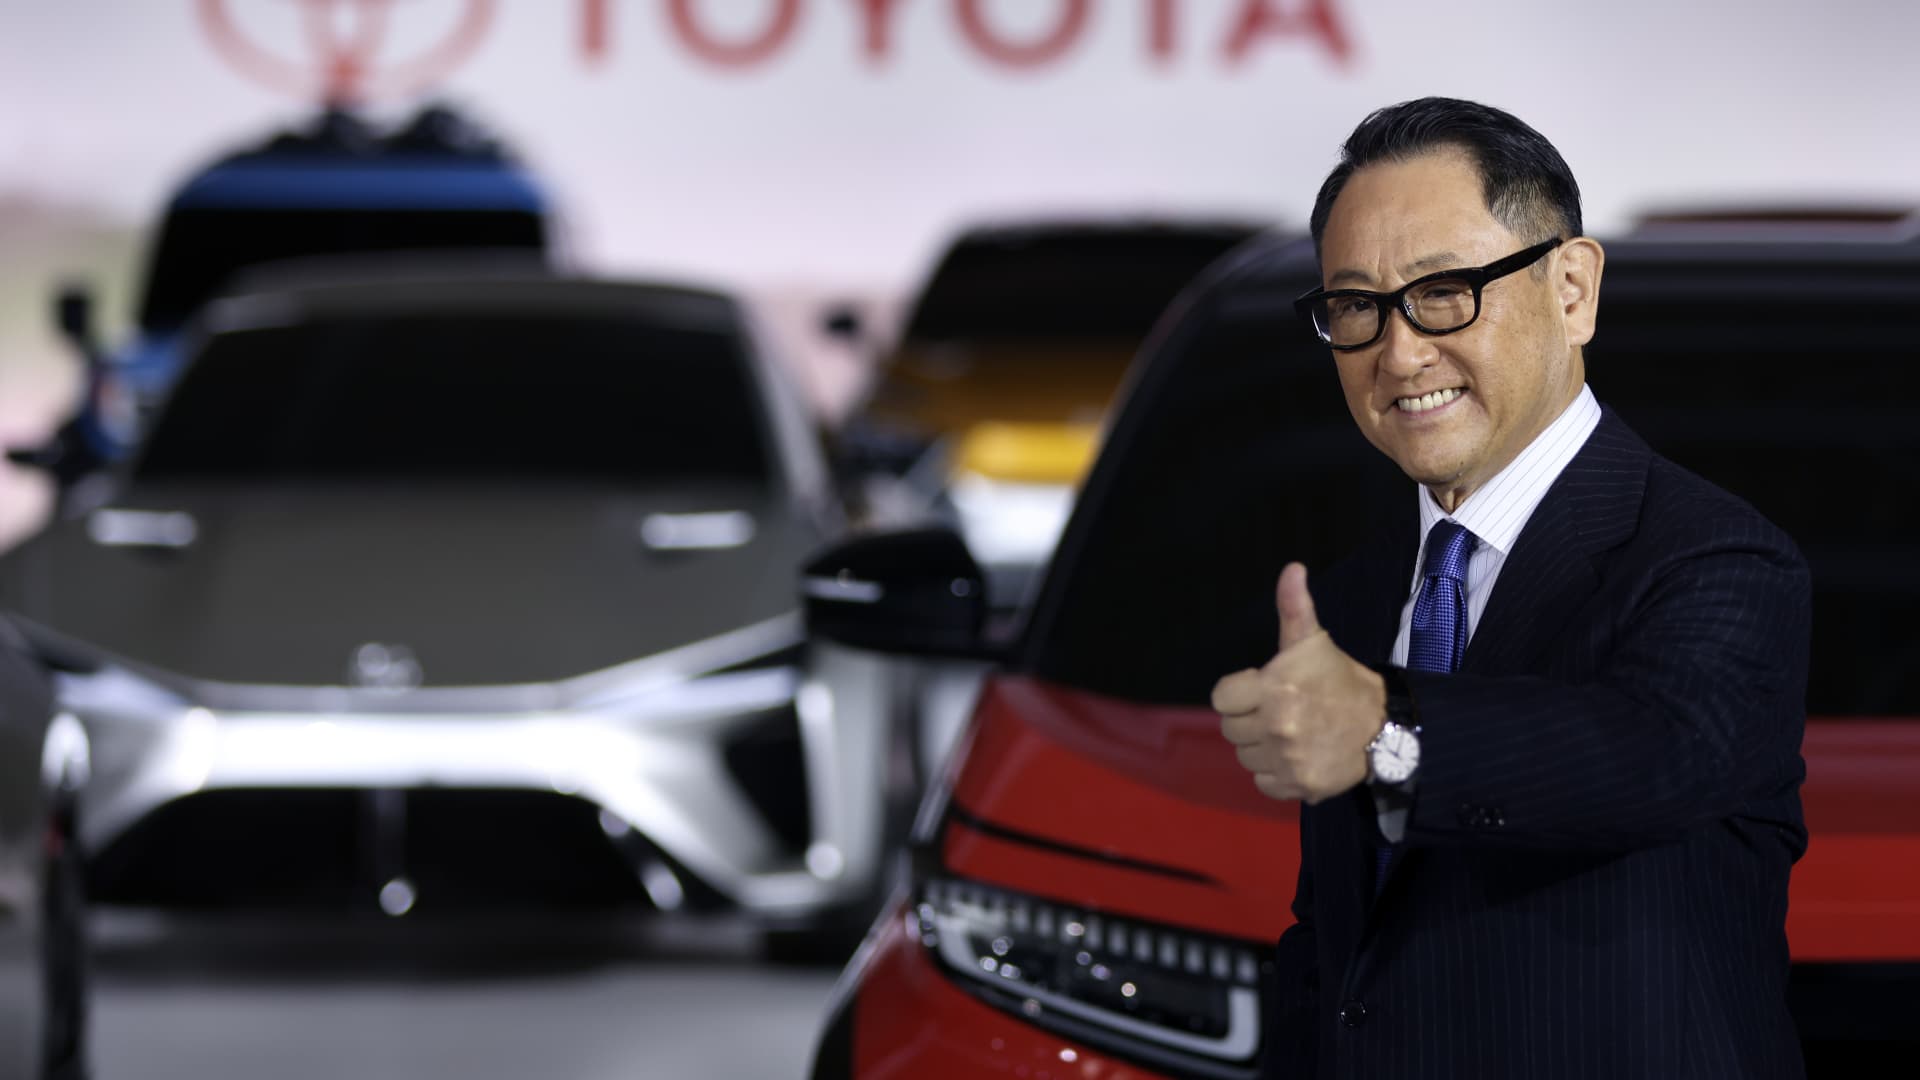 Akio Toyoda, president of Toyota Motor Corp., gestures while posing for photographs during a news conference at the company's showroom in Tokyo, Japan, Dec. 14, 2021. Toyota announced plans for its EV vehicles.